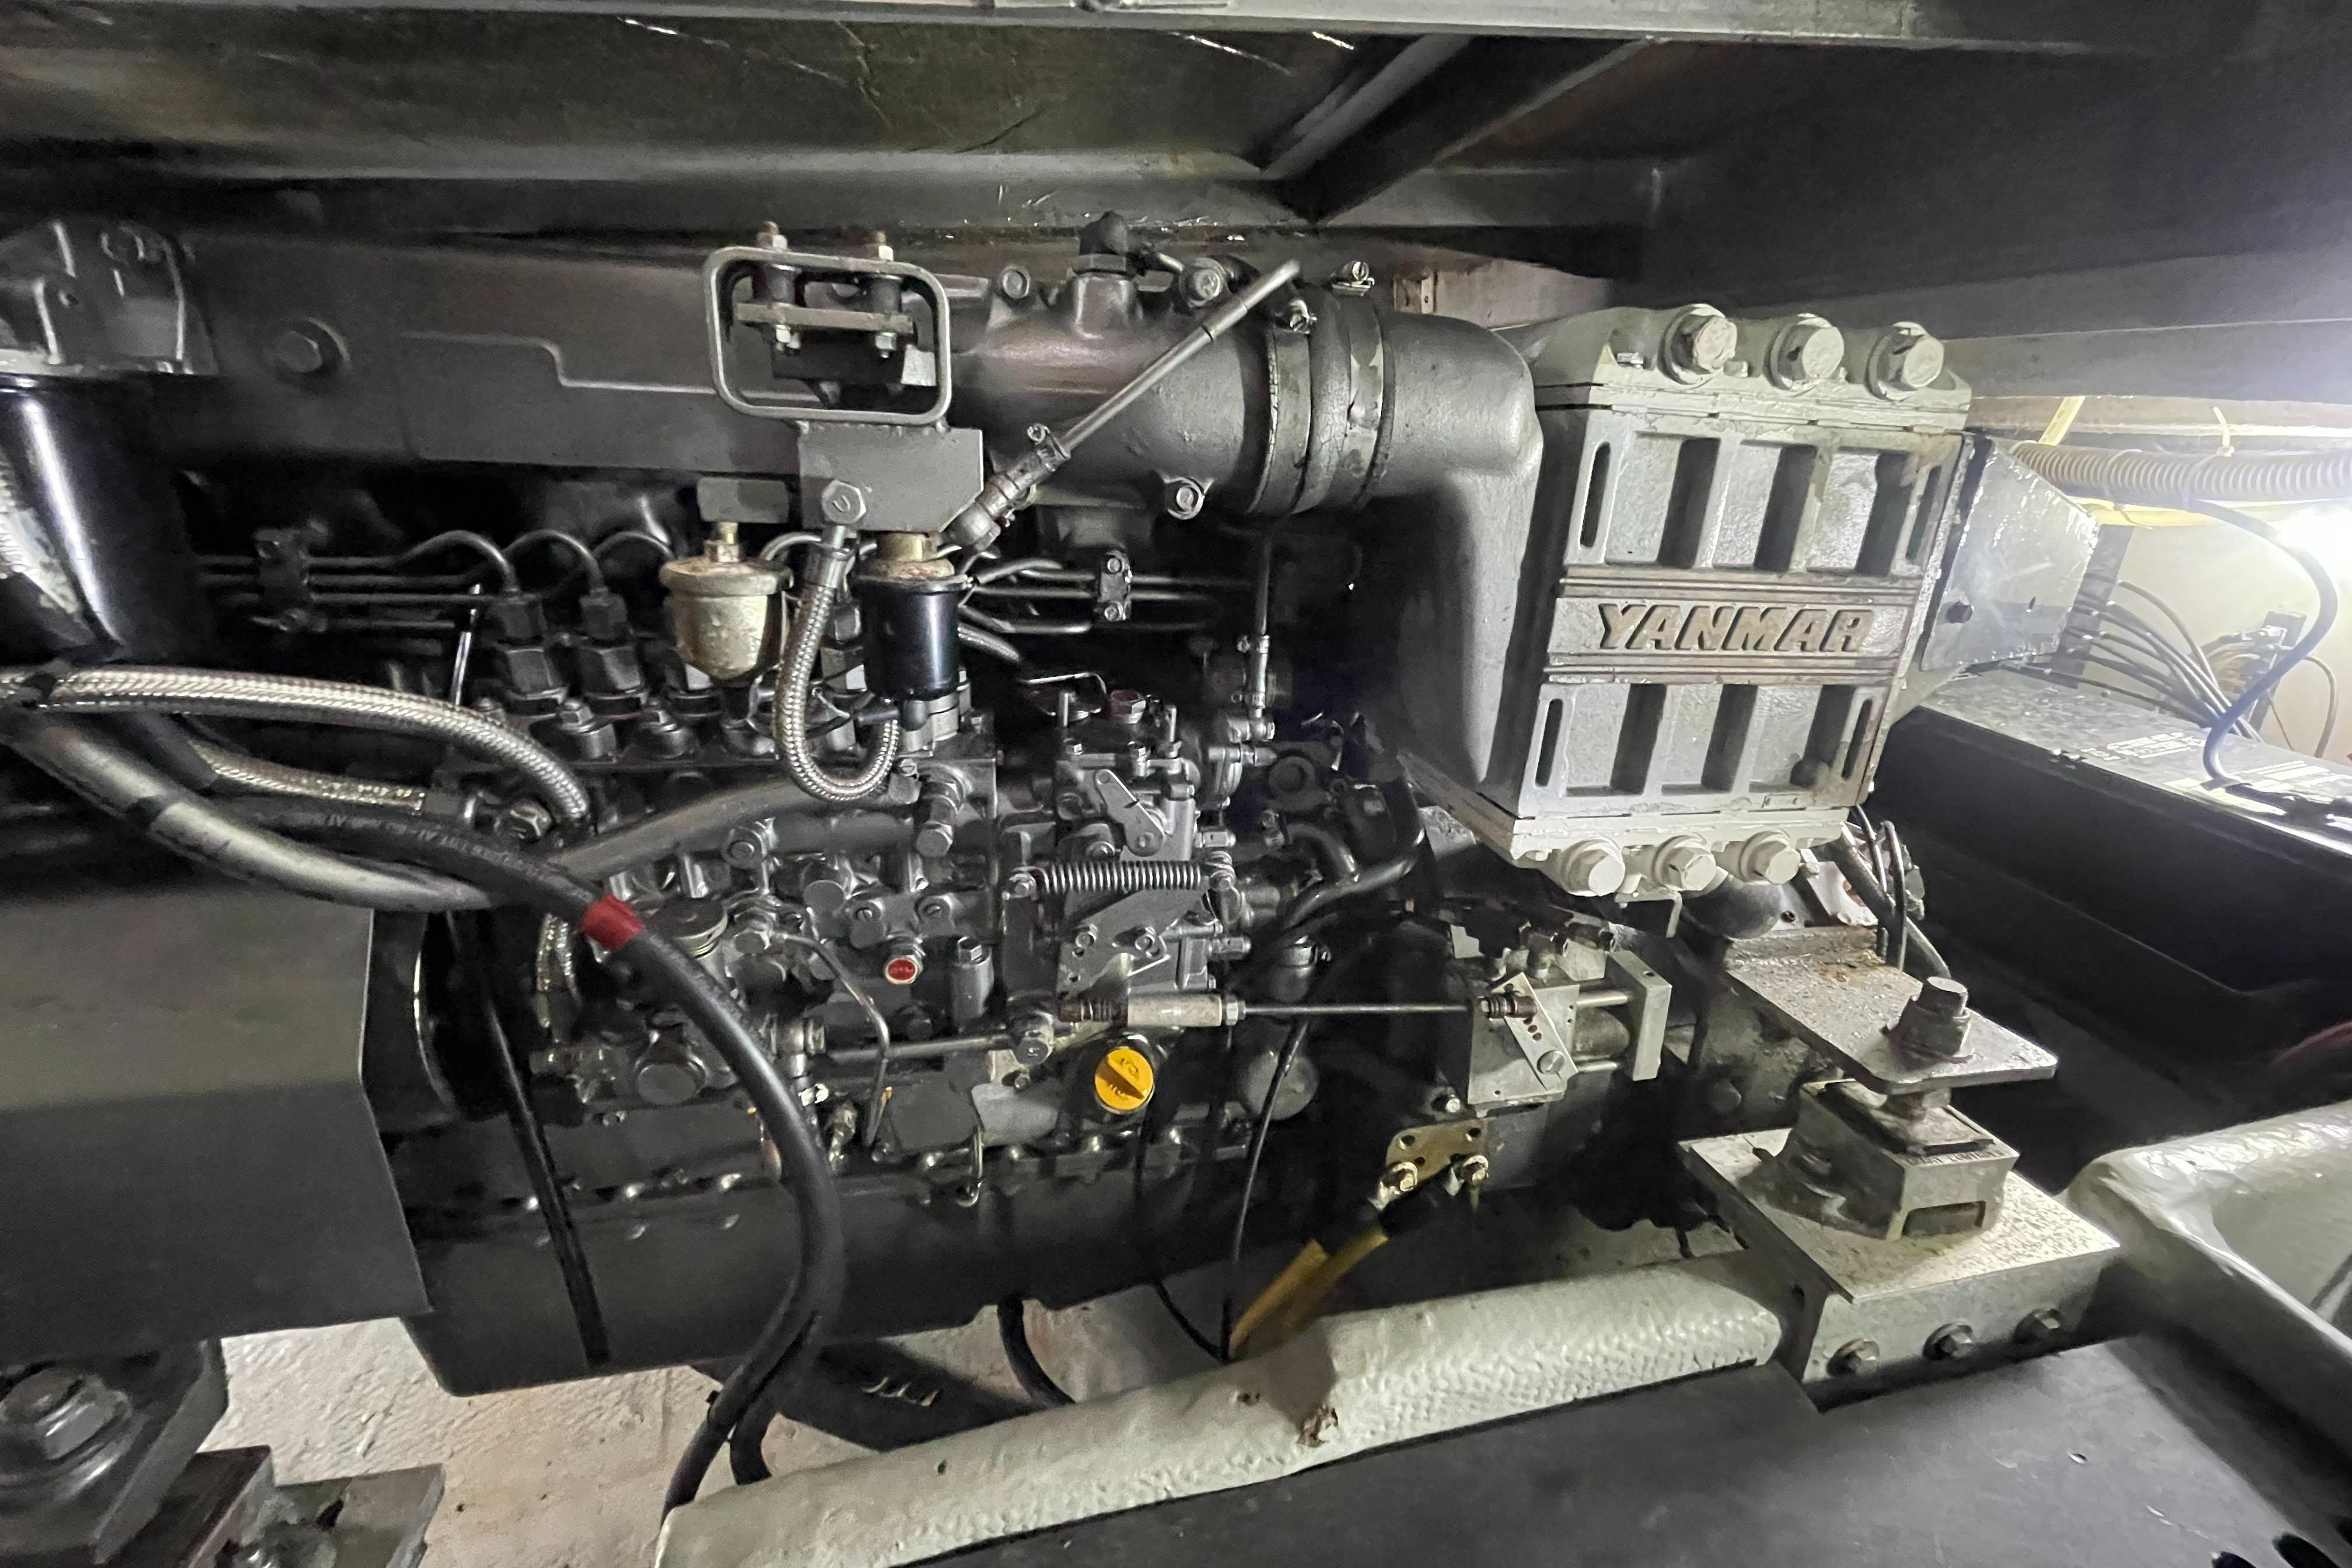 2001 Luhrs 400 Tournament Convertible - Engine Room